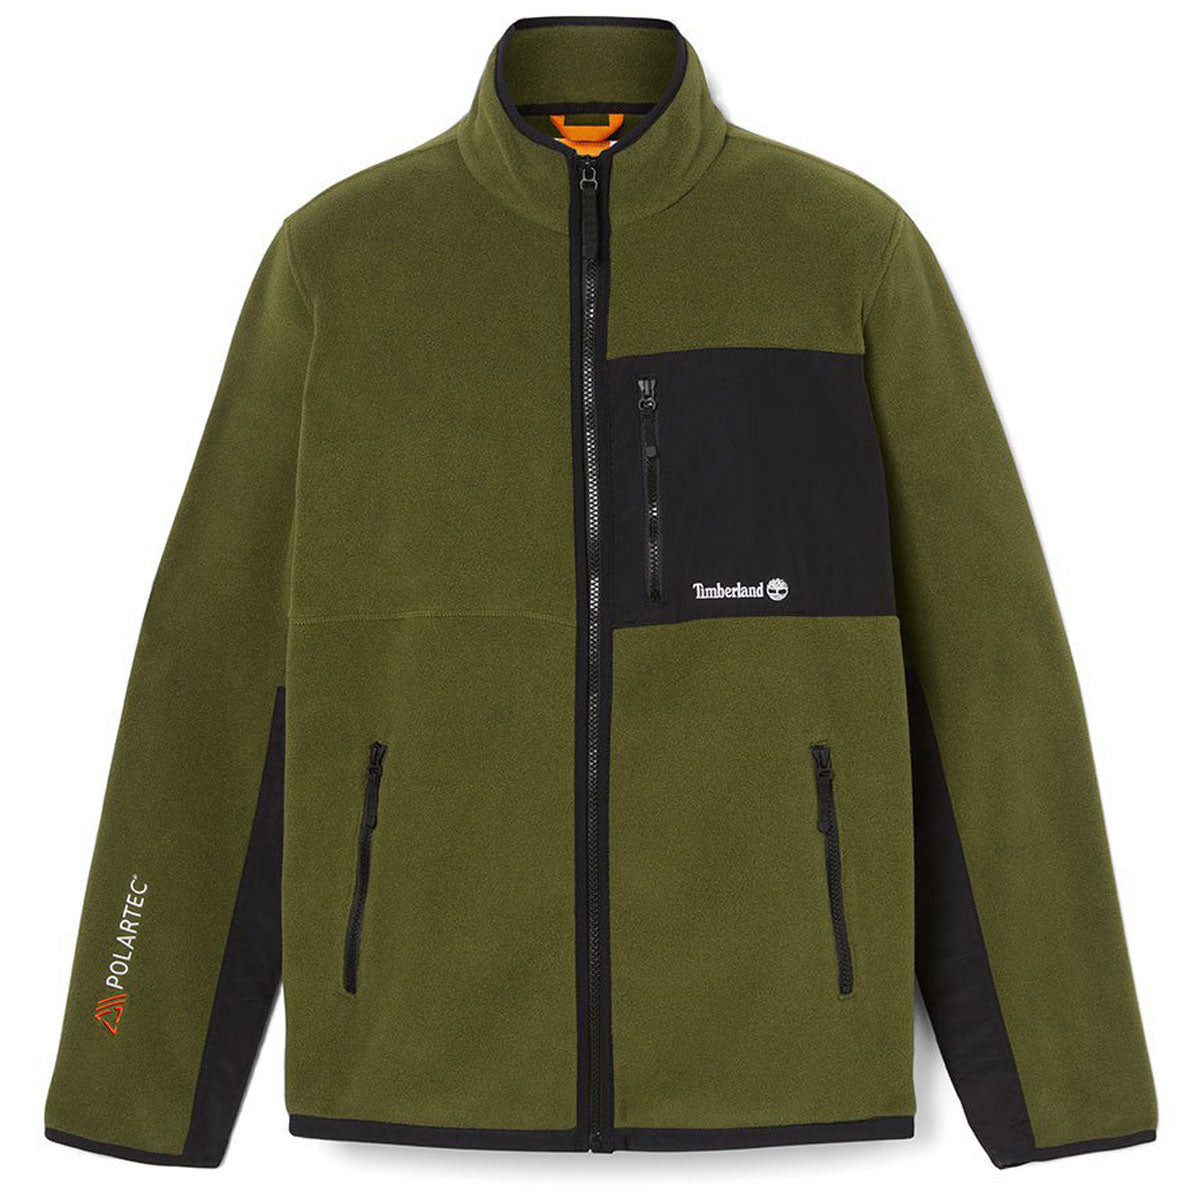 Timberland Outdoor Archive Re-issue Jacket - Dark Olive image 4